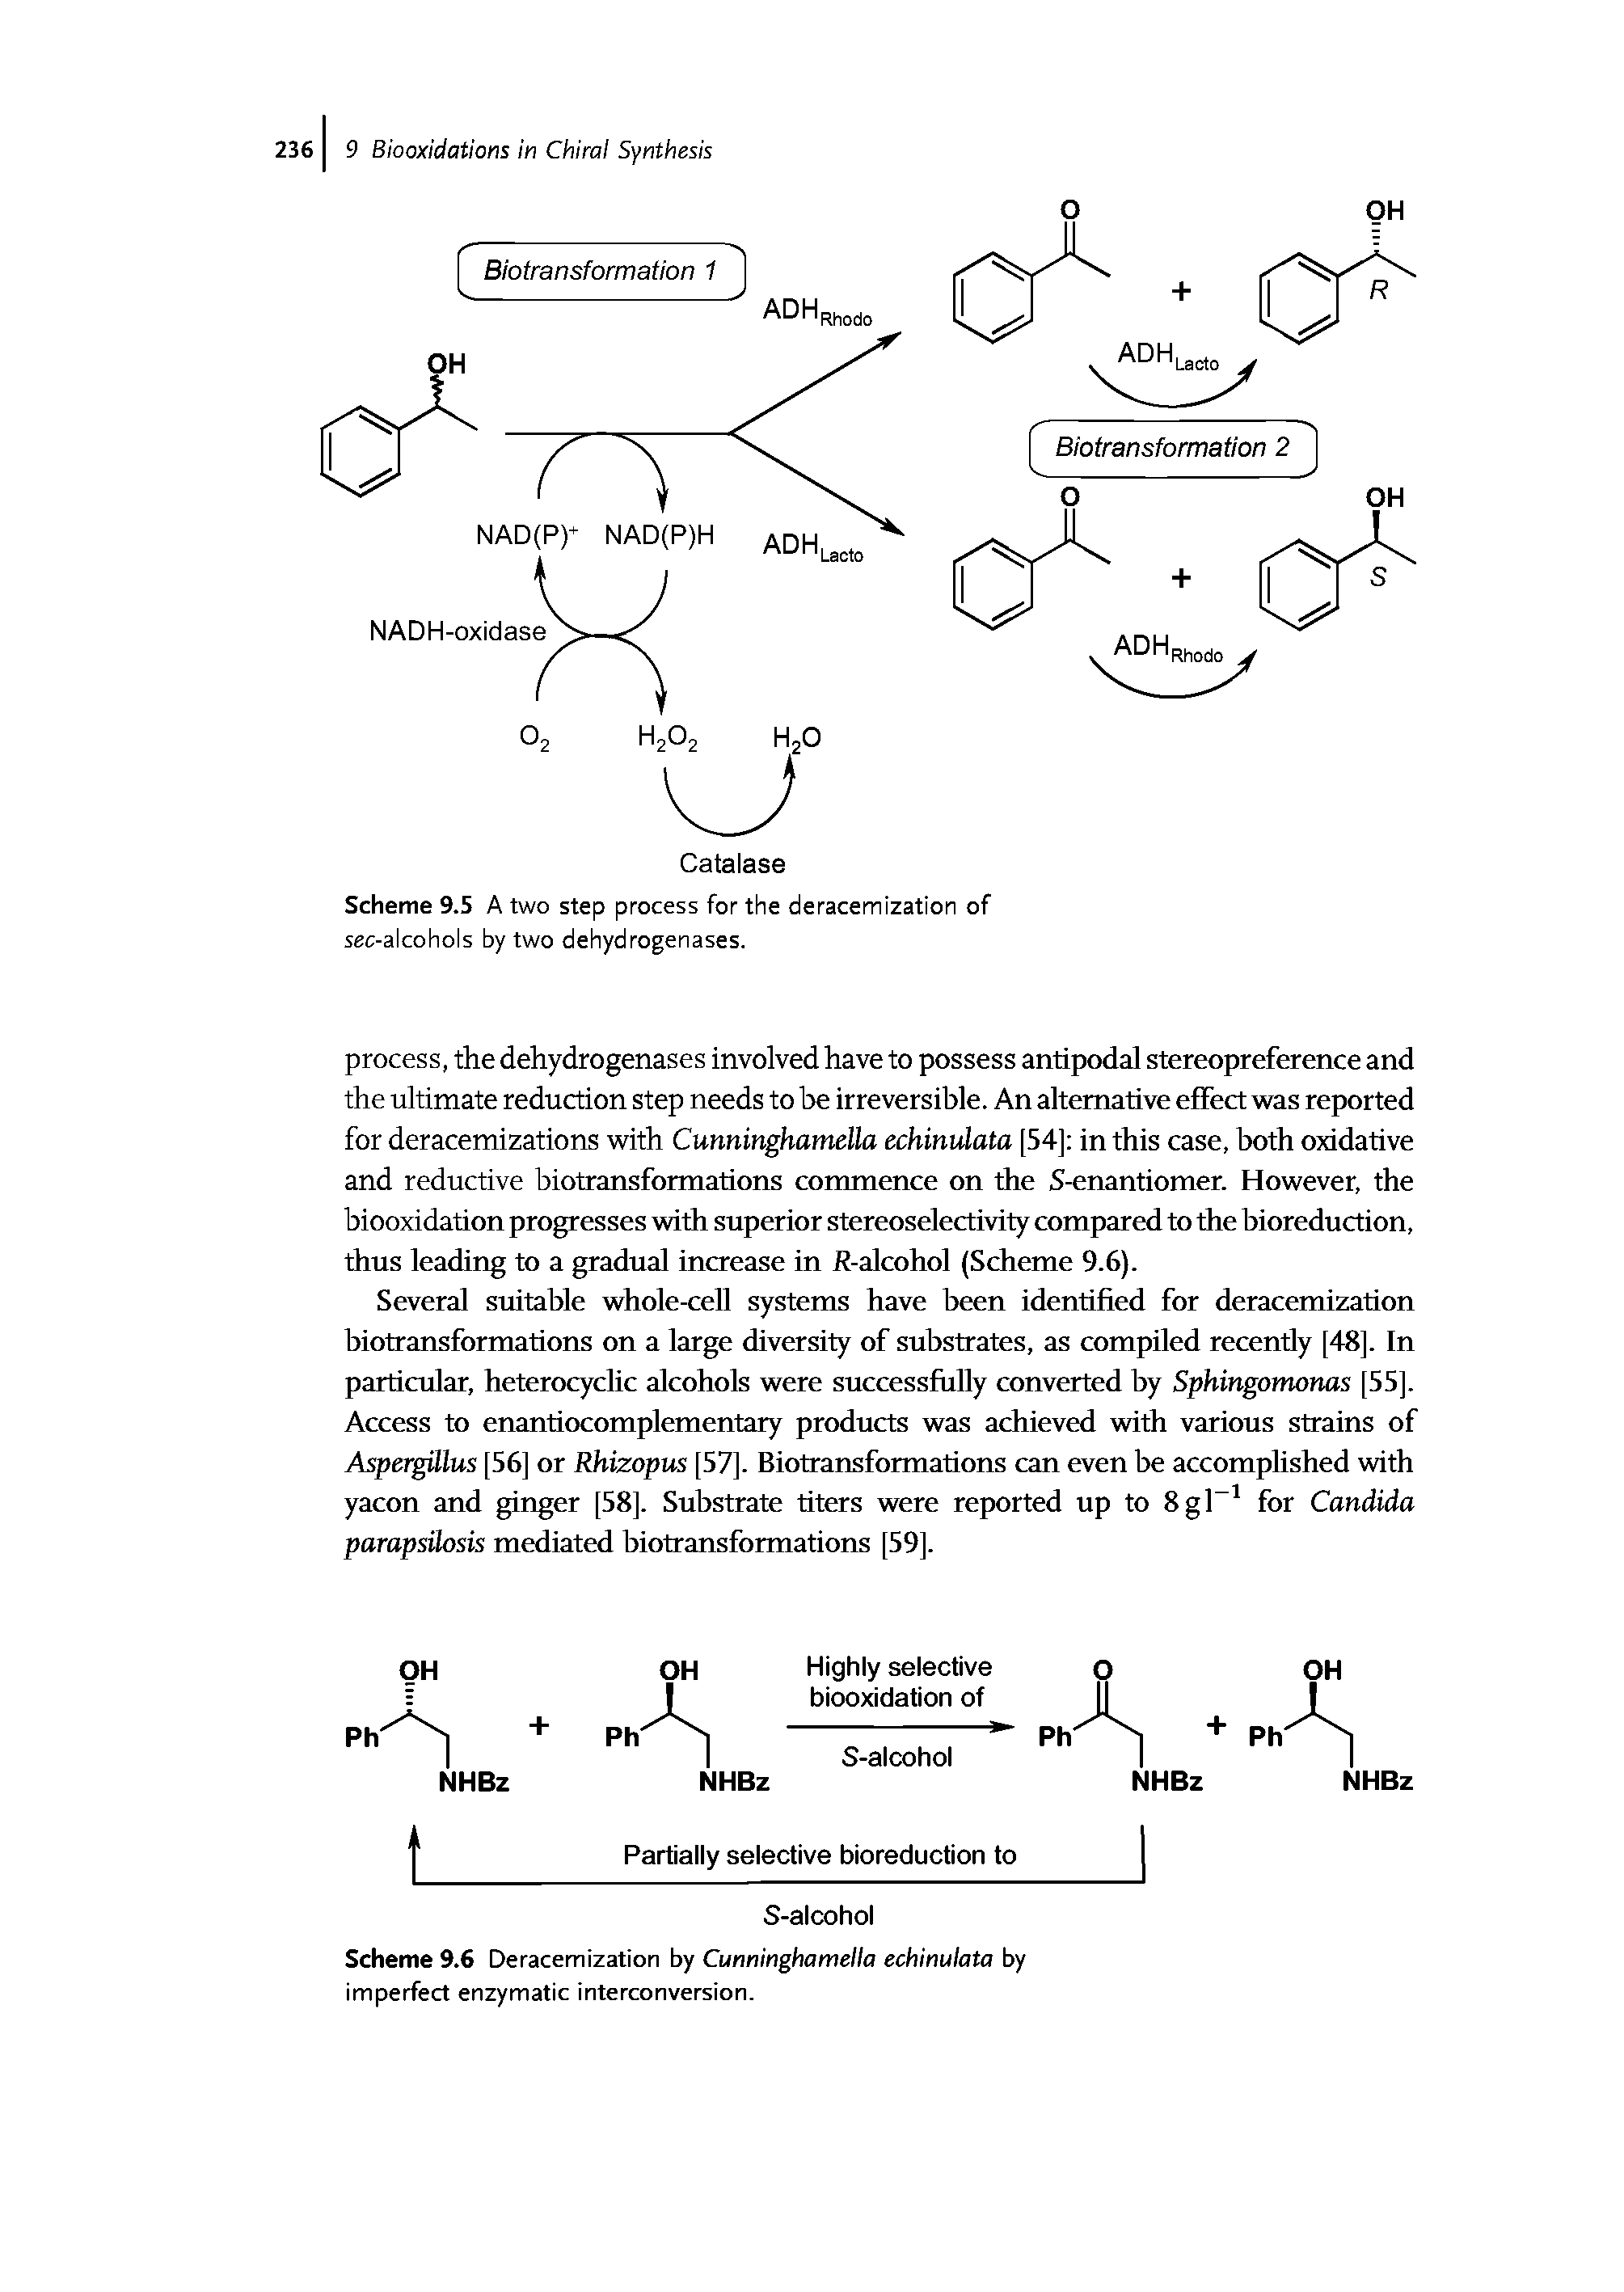 Scheme 9.5 A two step process for the deracemization of sec-alcohols by two dehydrogenases.